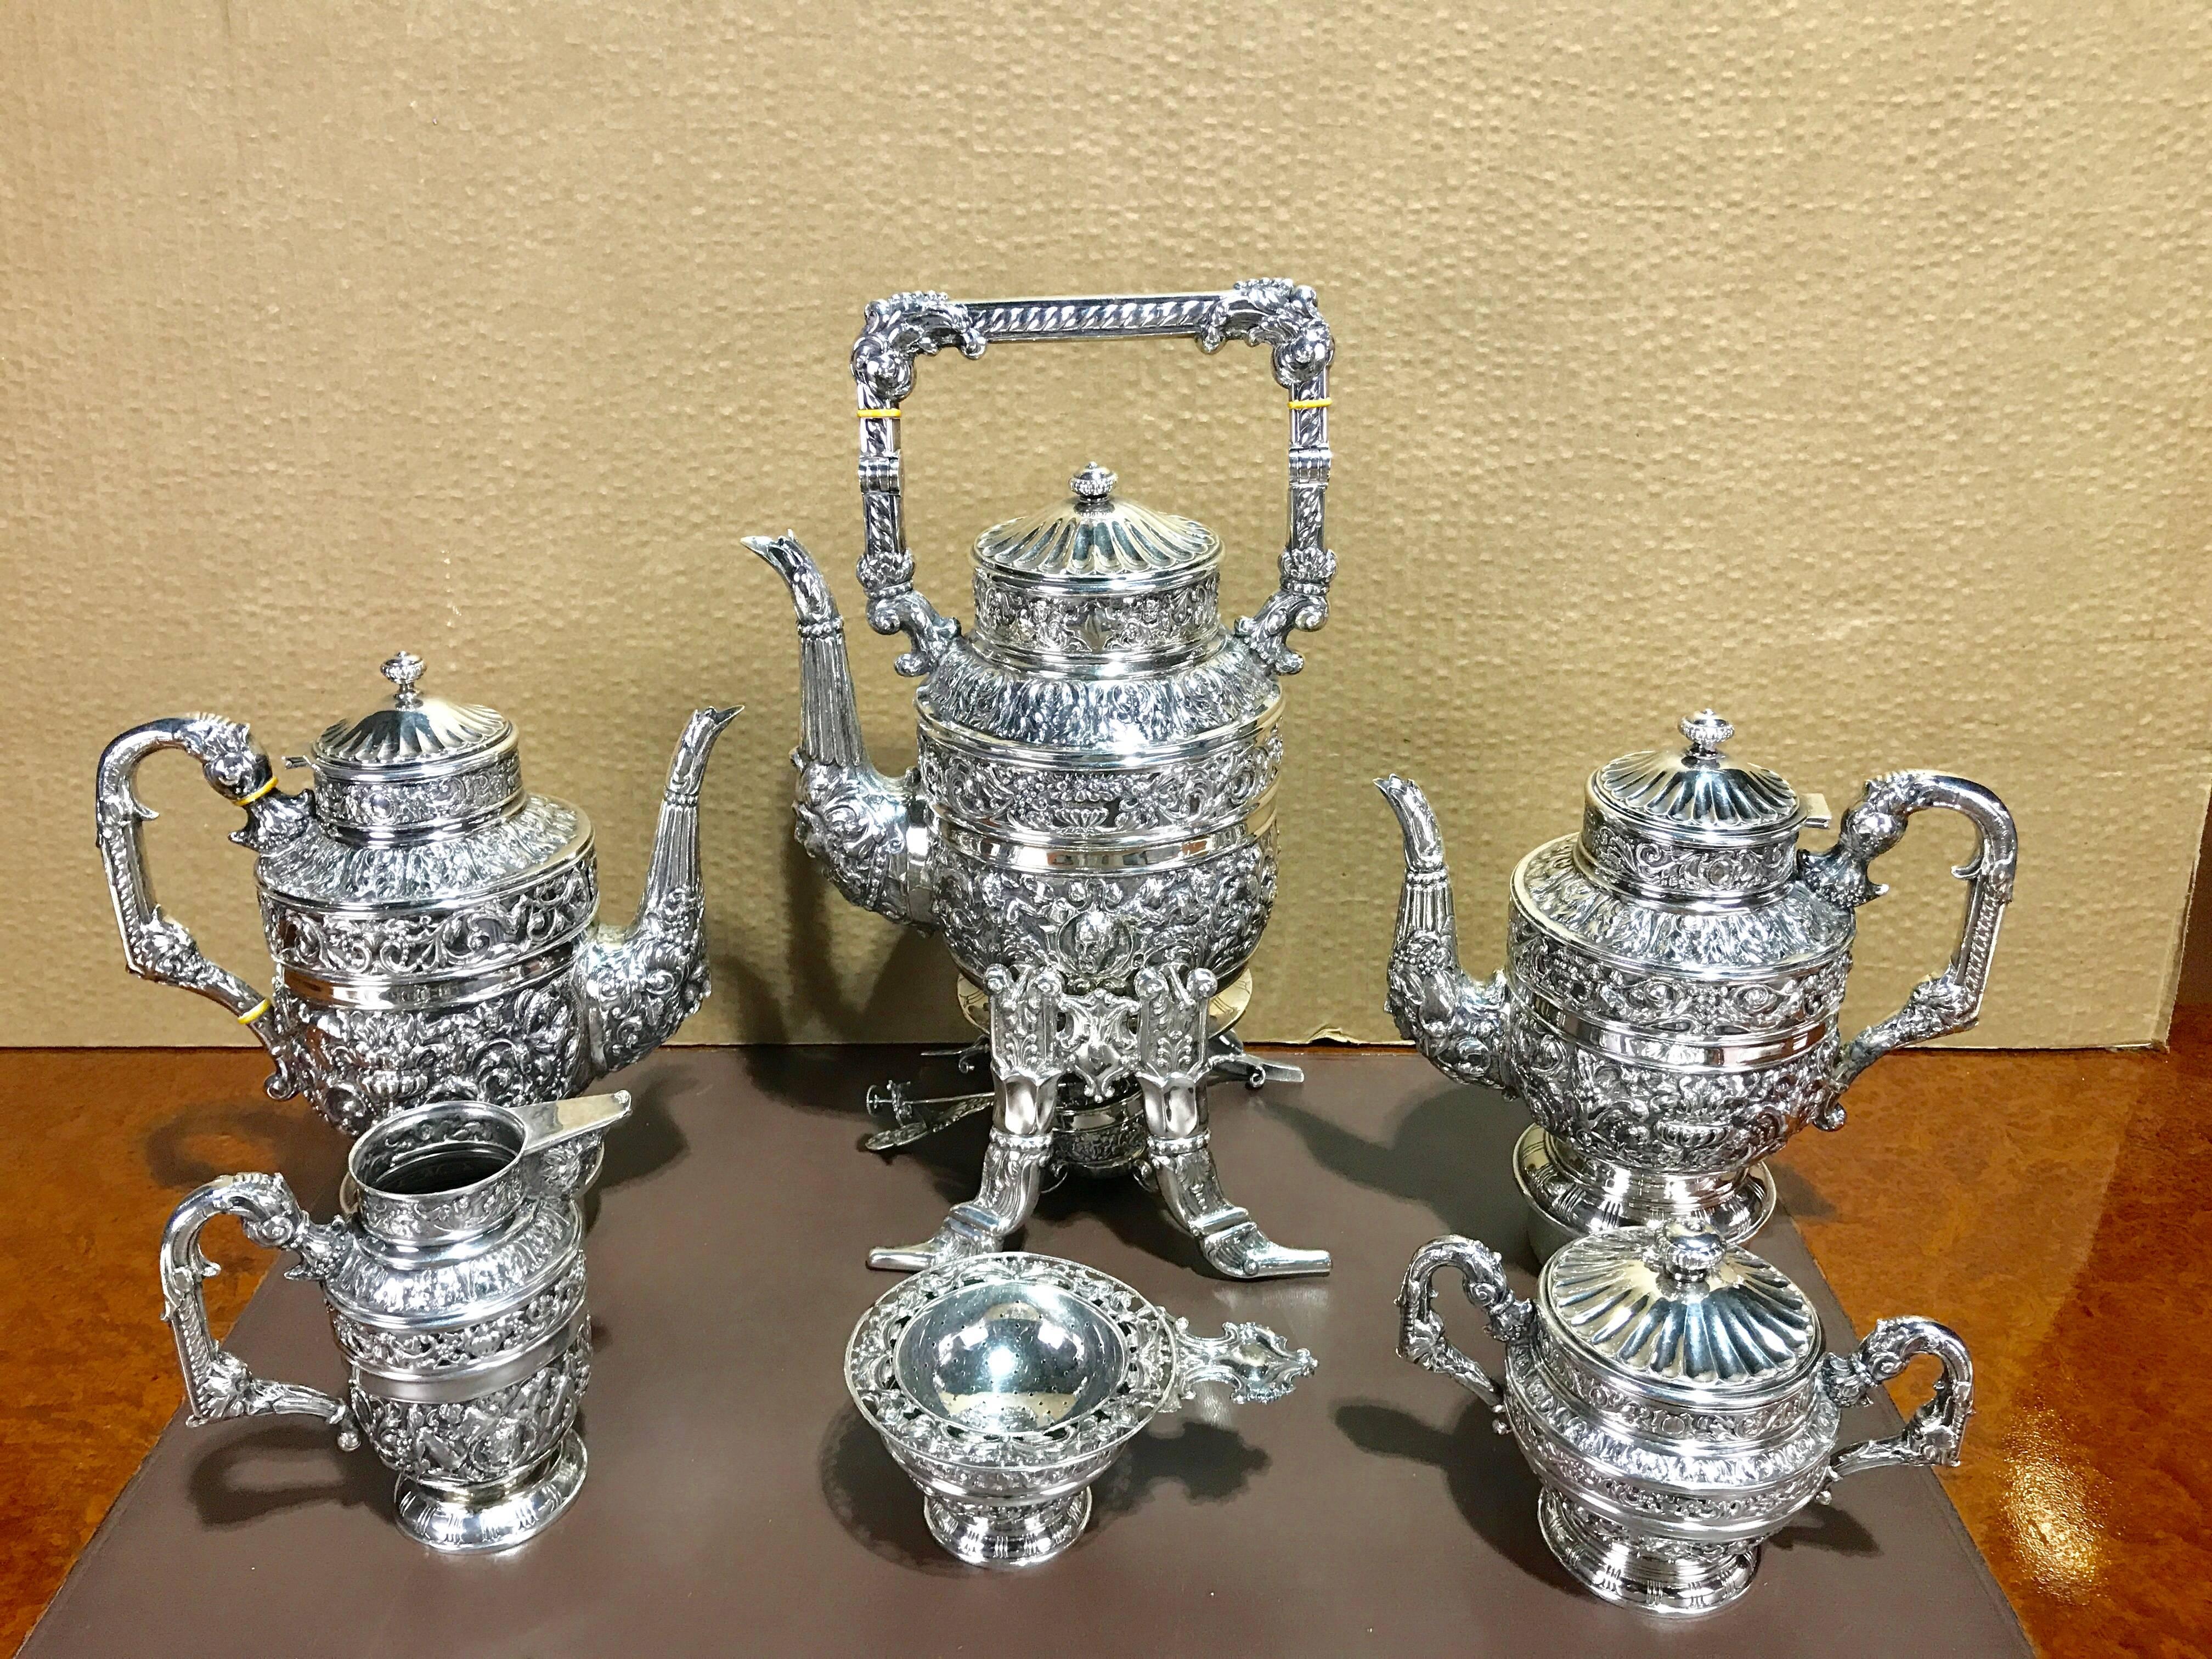 Massive Cellini sterling tea and coffee service, Hallmarks for Spain, late 19th century, weighing 190 ounces.
An extensive and complete set consisting of six elaborate articles:
Tilting hot water kettle on bootjack motif stand with burner 17